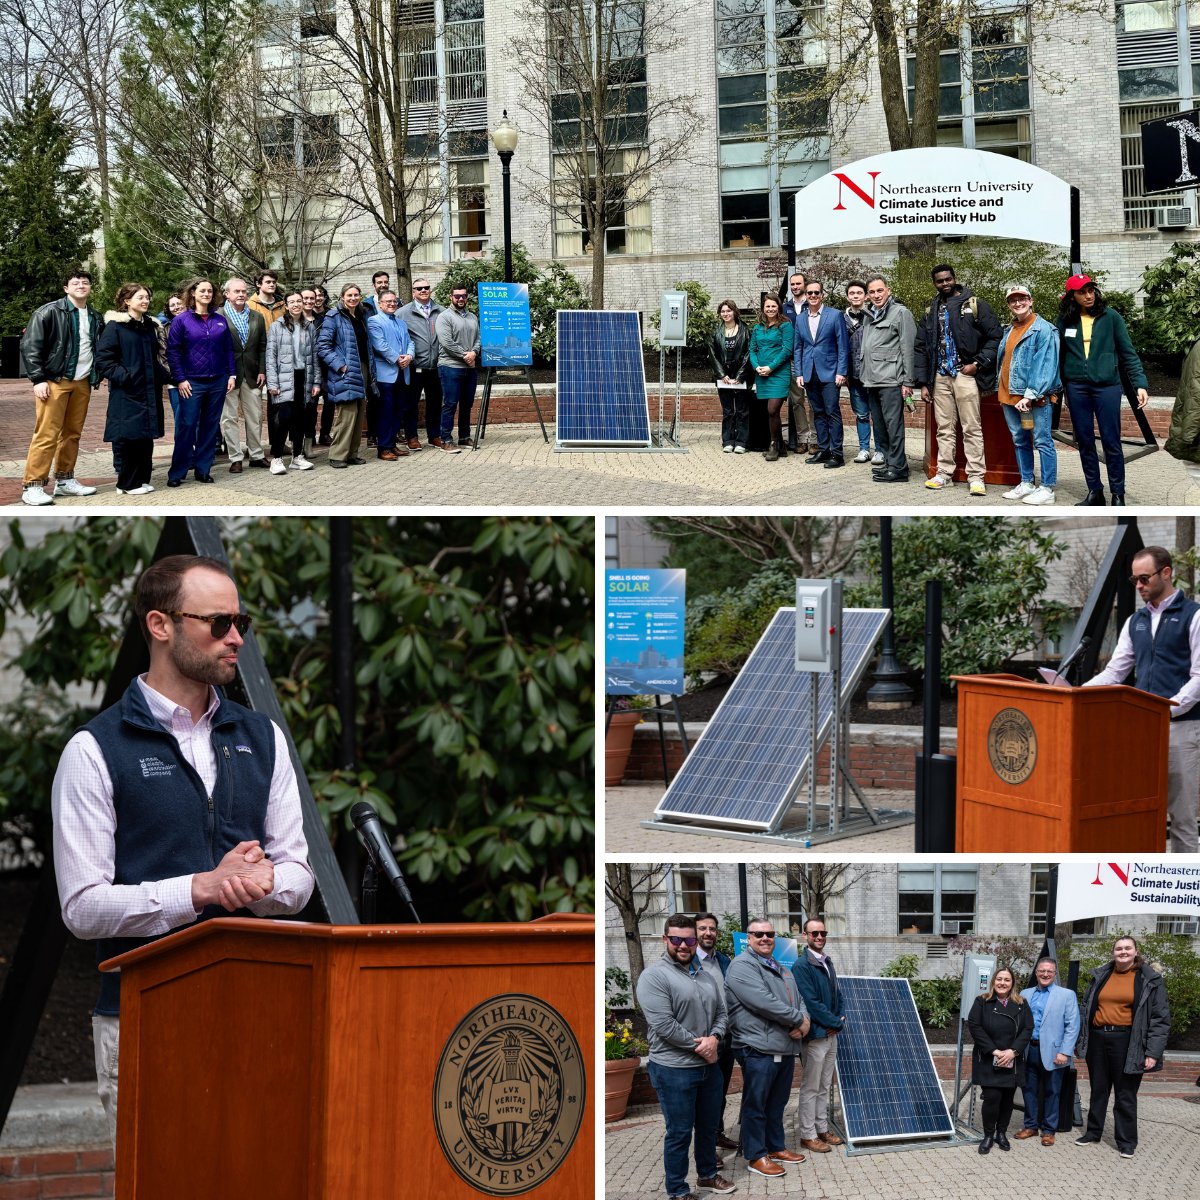 Excited to announce the completion of our ~158 kWp #solargrid project with @Northeastern, which is designed to offset 146 MT of #carbonemissions per year. We’re proud to partner with the University on their #decarbonization journey. Learn more at: hubs.ly/Q02rFkTd0